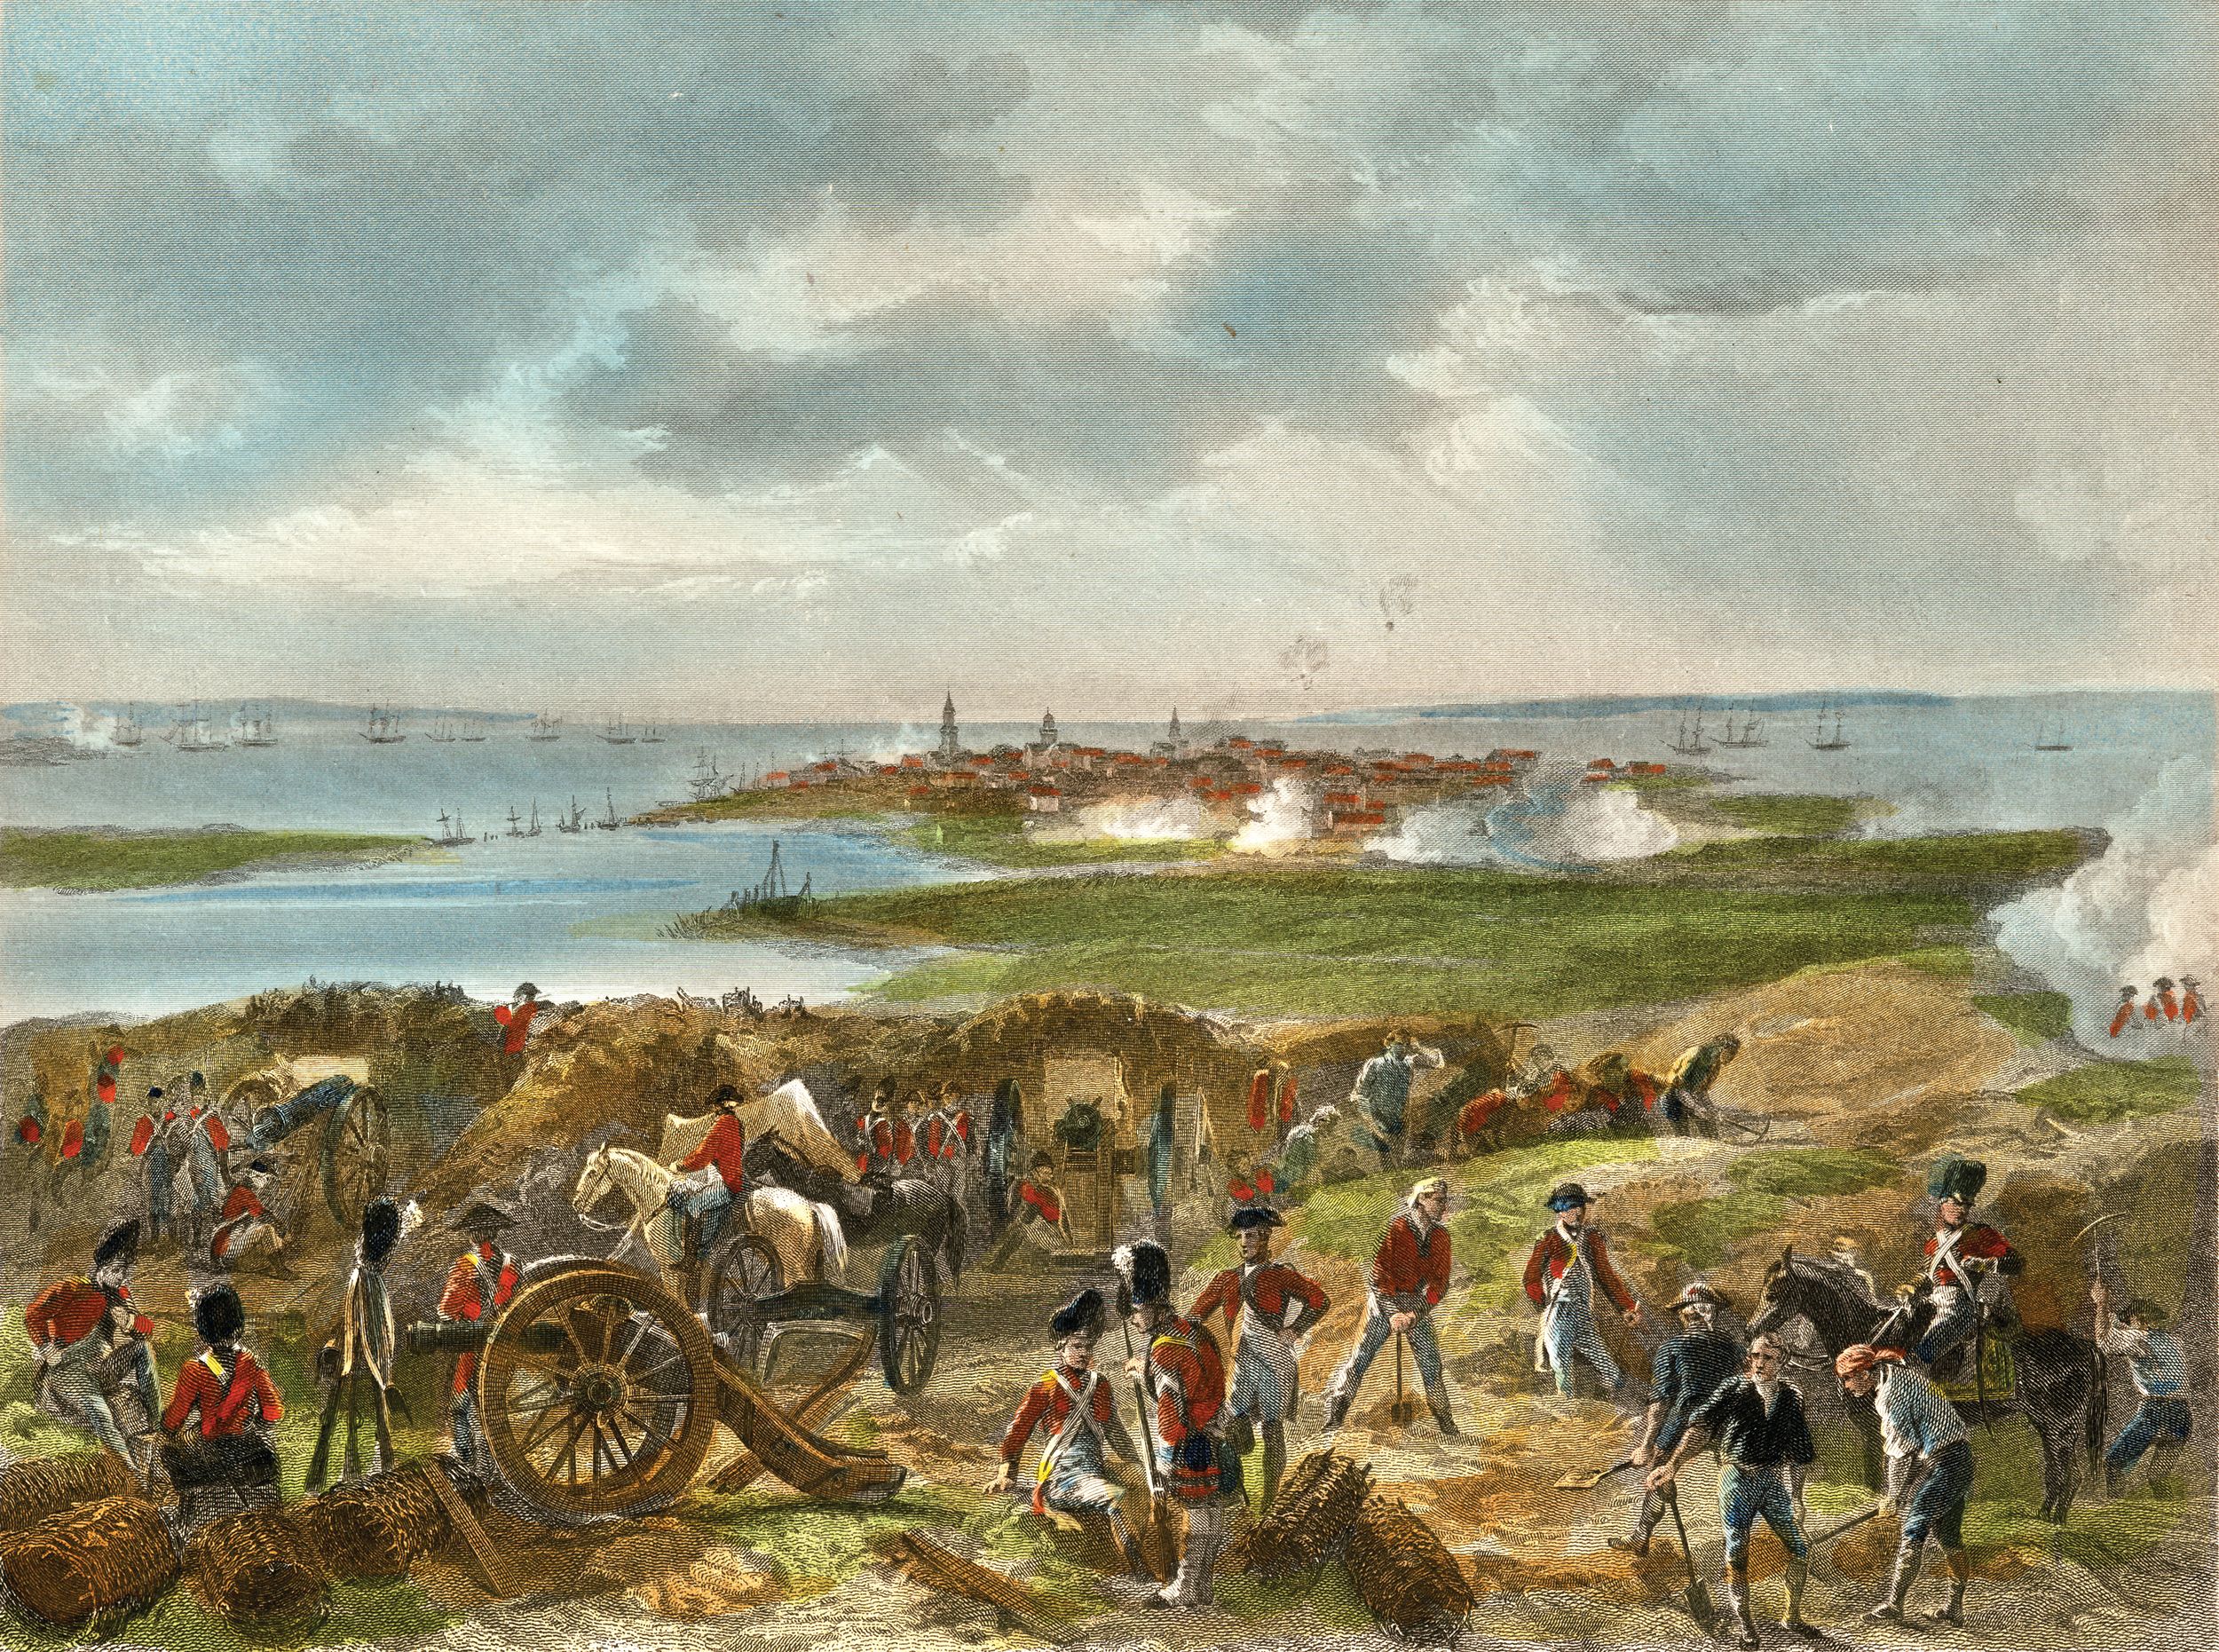 British troops fire cannon from behind earthworks during their seige of Charleston, South Carolina, in April 1780. The Americans defending the city, including most of the Continental Army in the south, surrendered on May 12, a serious setback for the American’s cause.